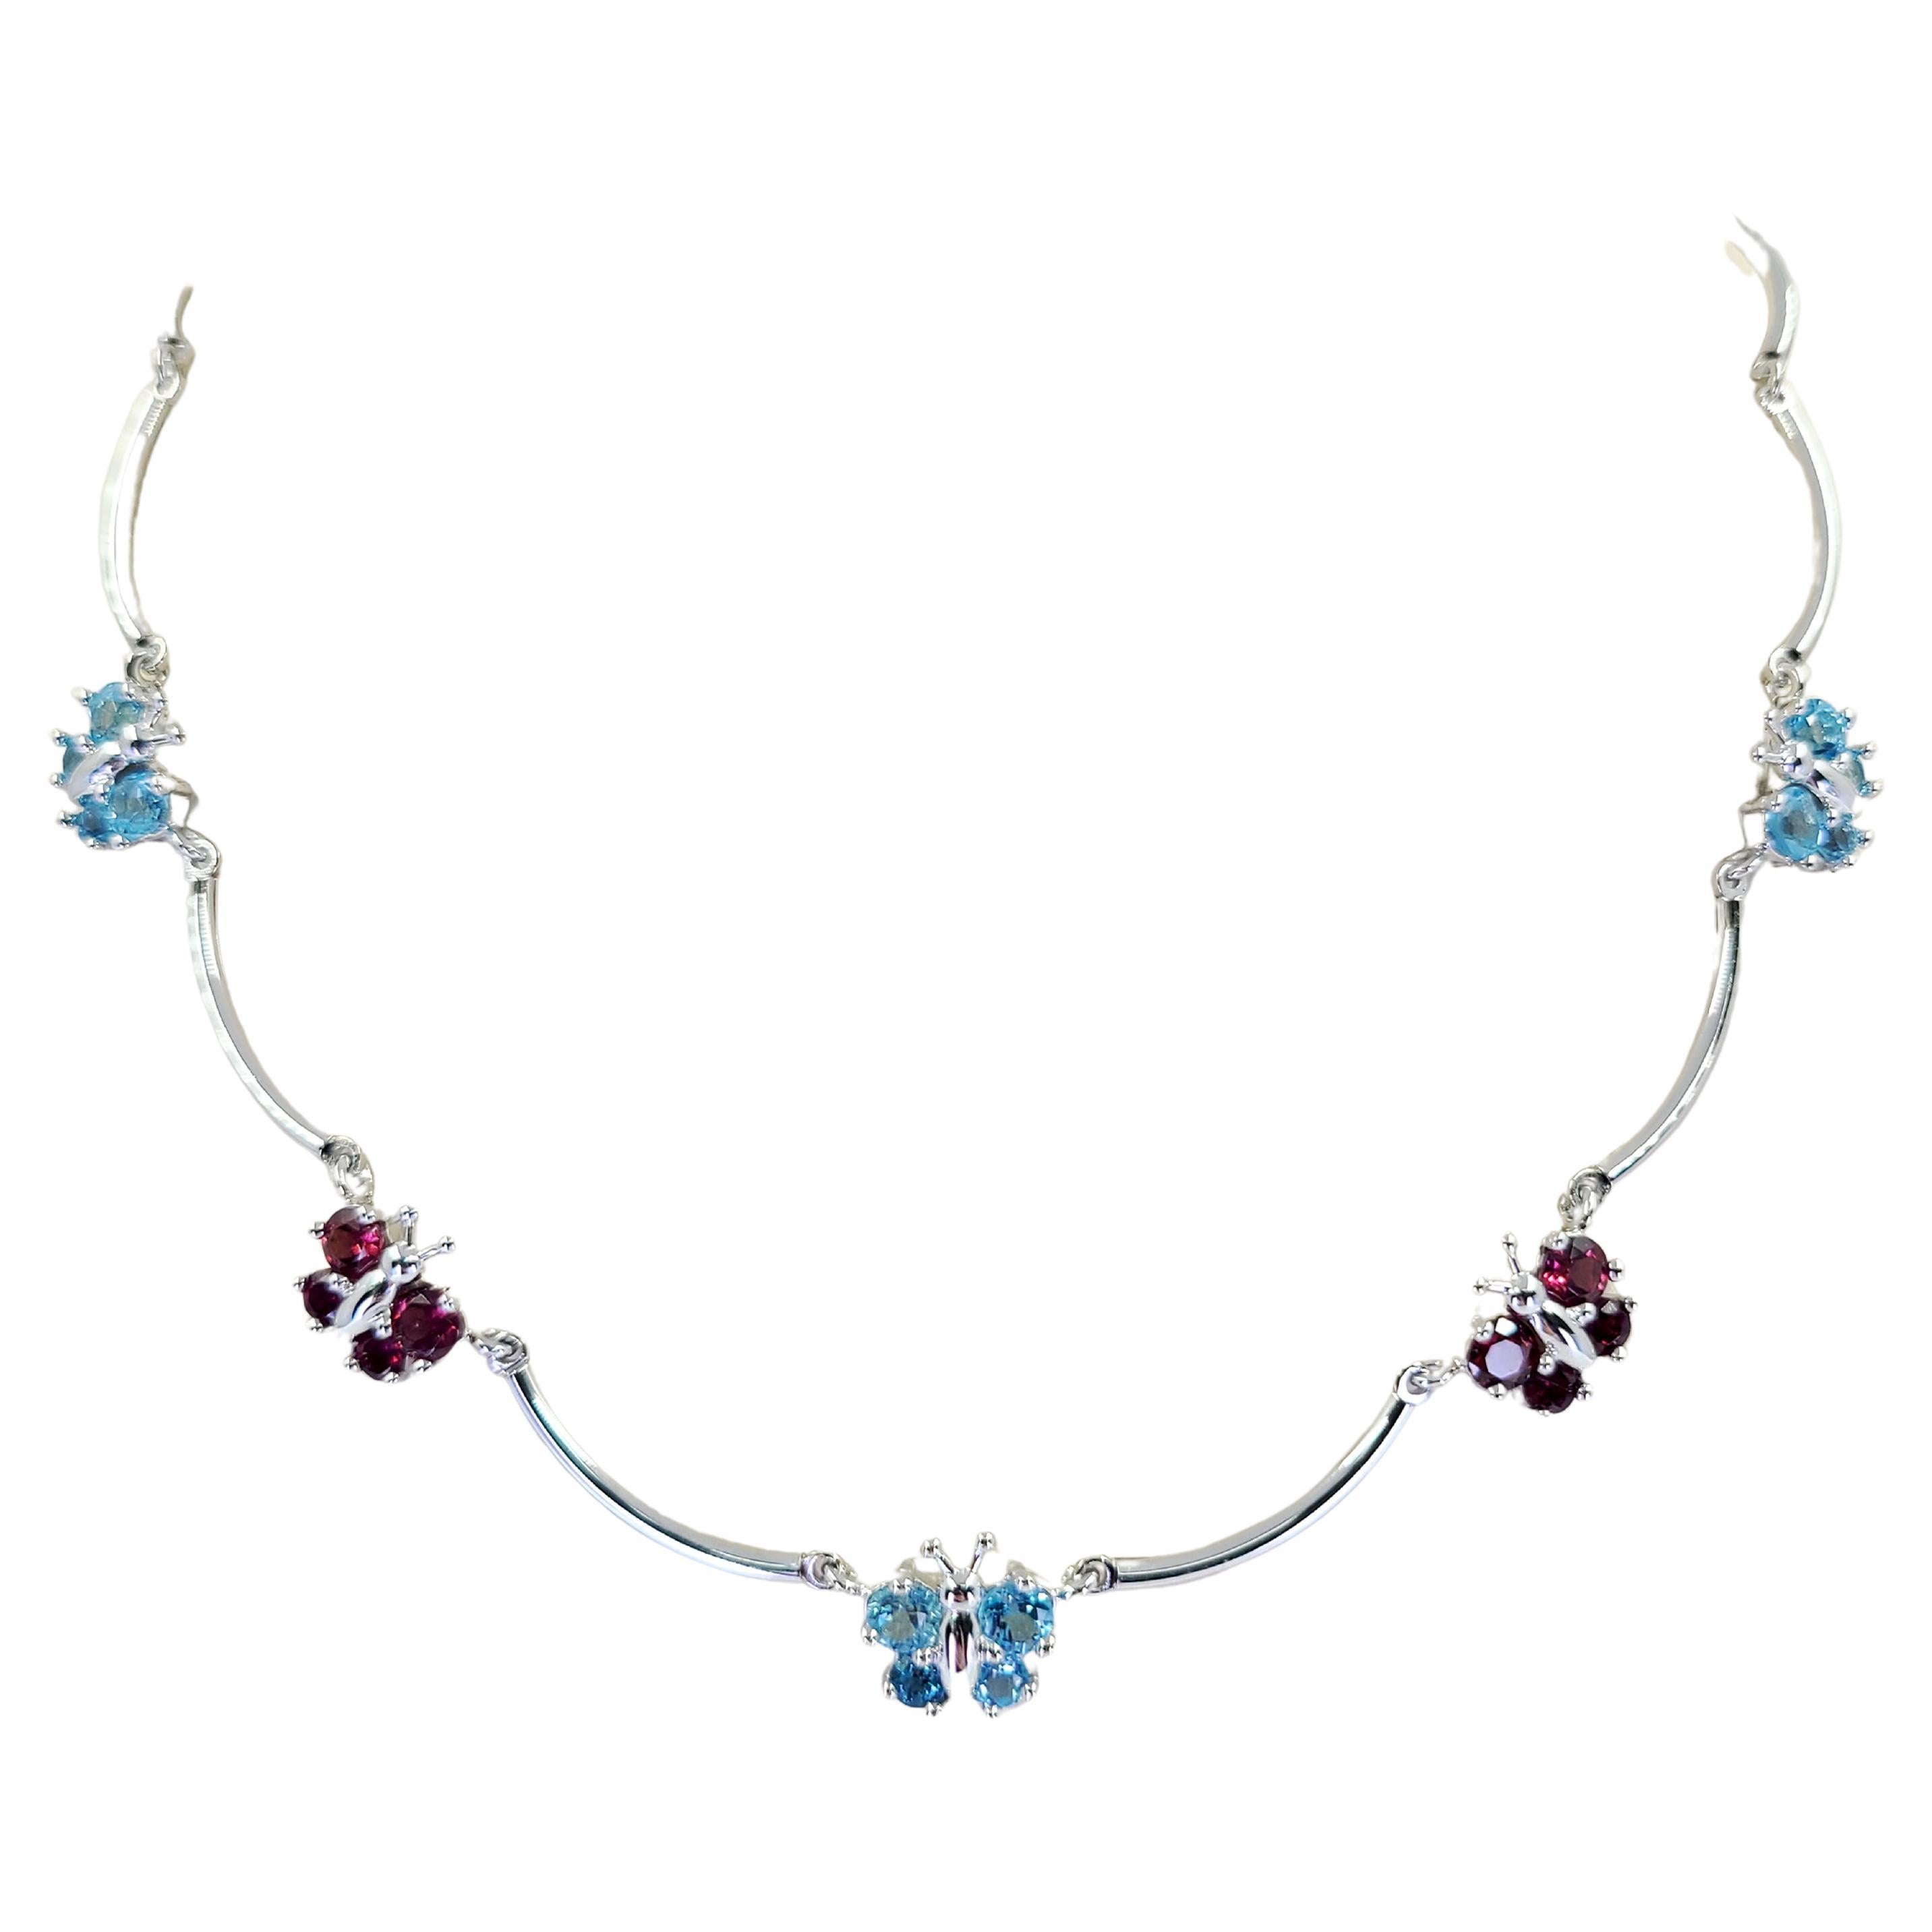 White Gold Butterfly Necklace with Blue Topaz and Garnet